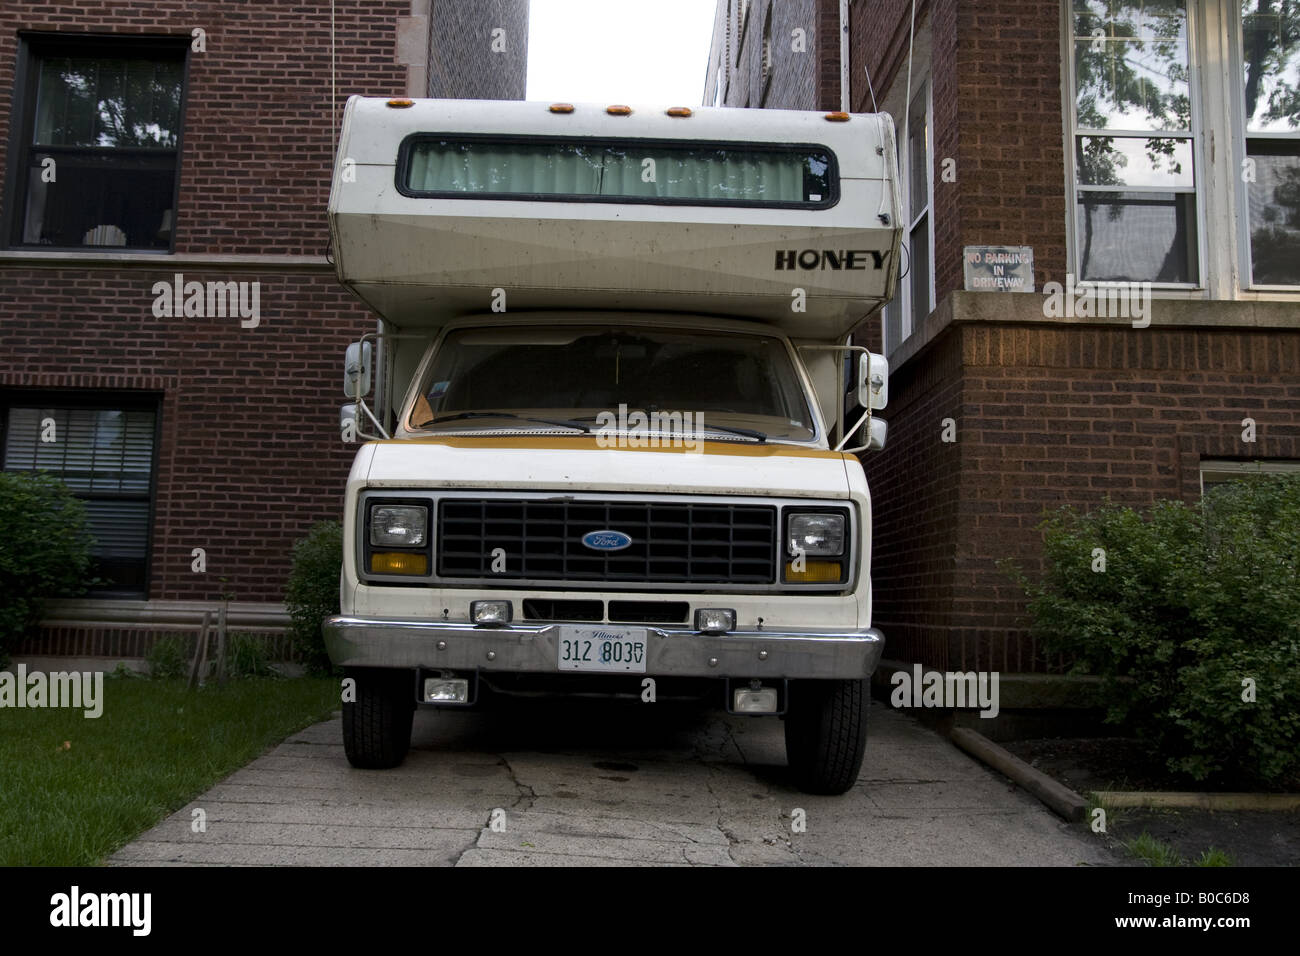 Ford camper van with a top wedged bewteen two apartment buildings Chicago IL Stock Photo